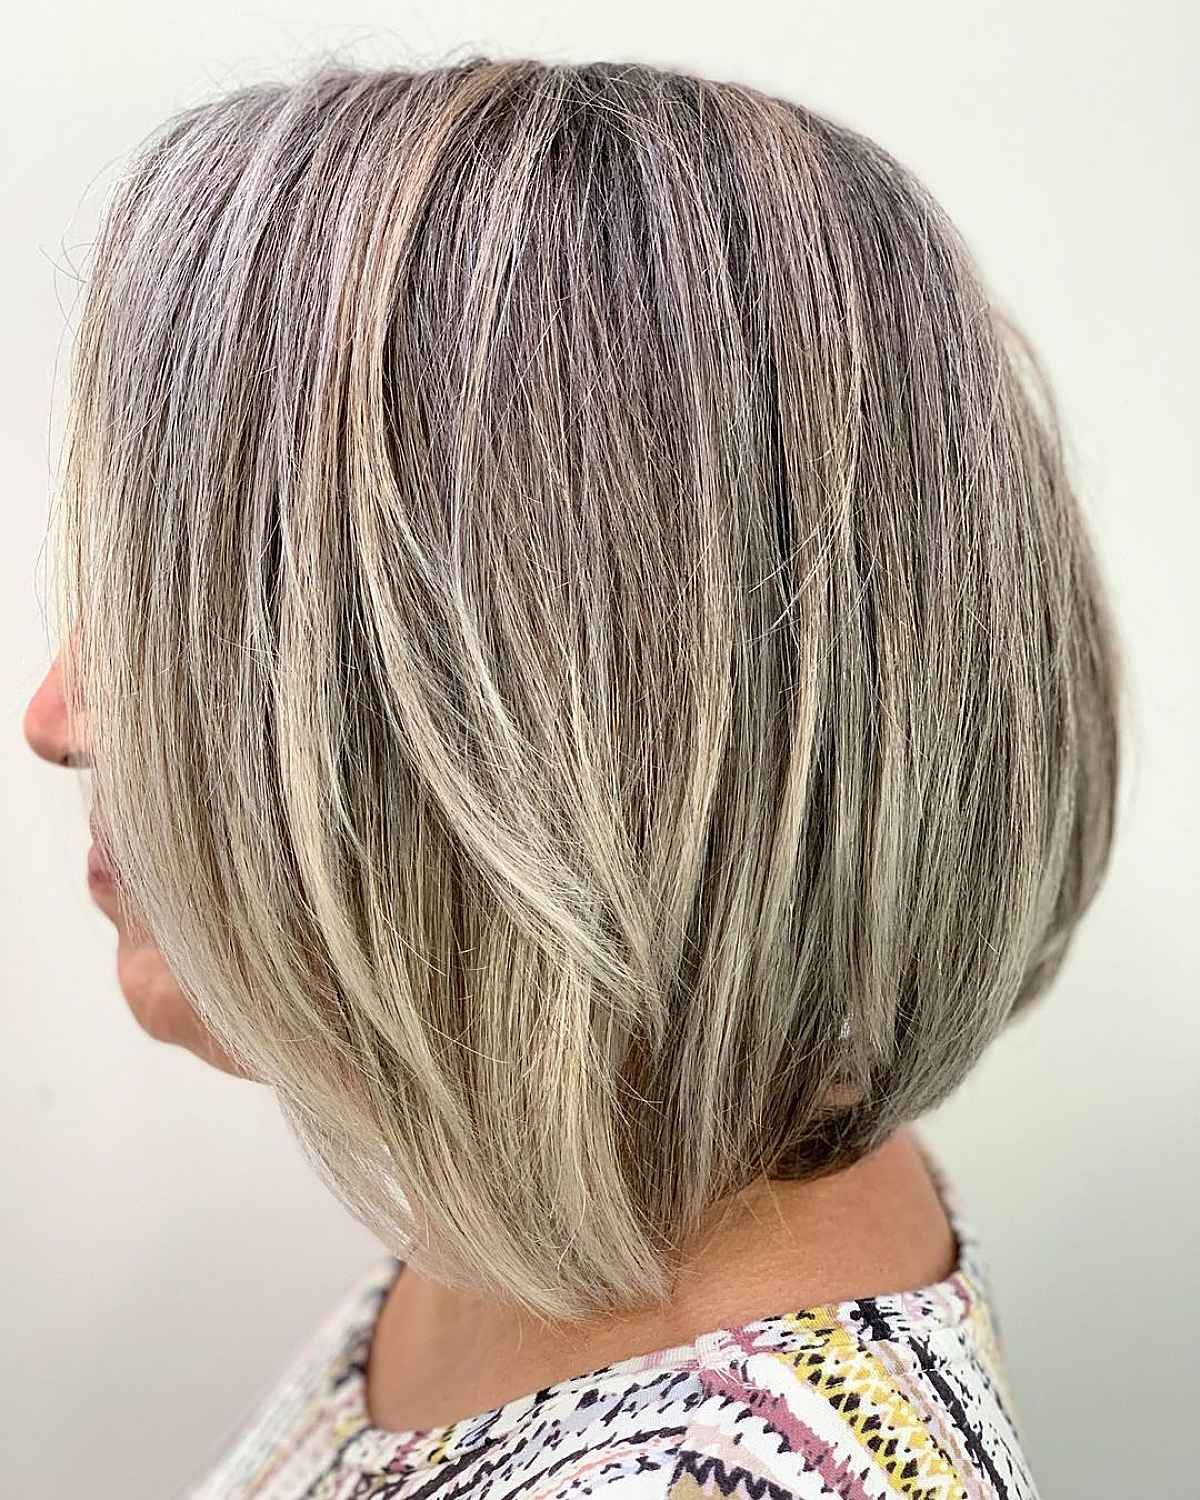 55 Straight Bob Haircut Ideas for a Simple &amp; Chic Look